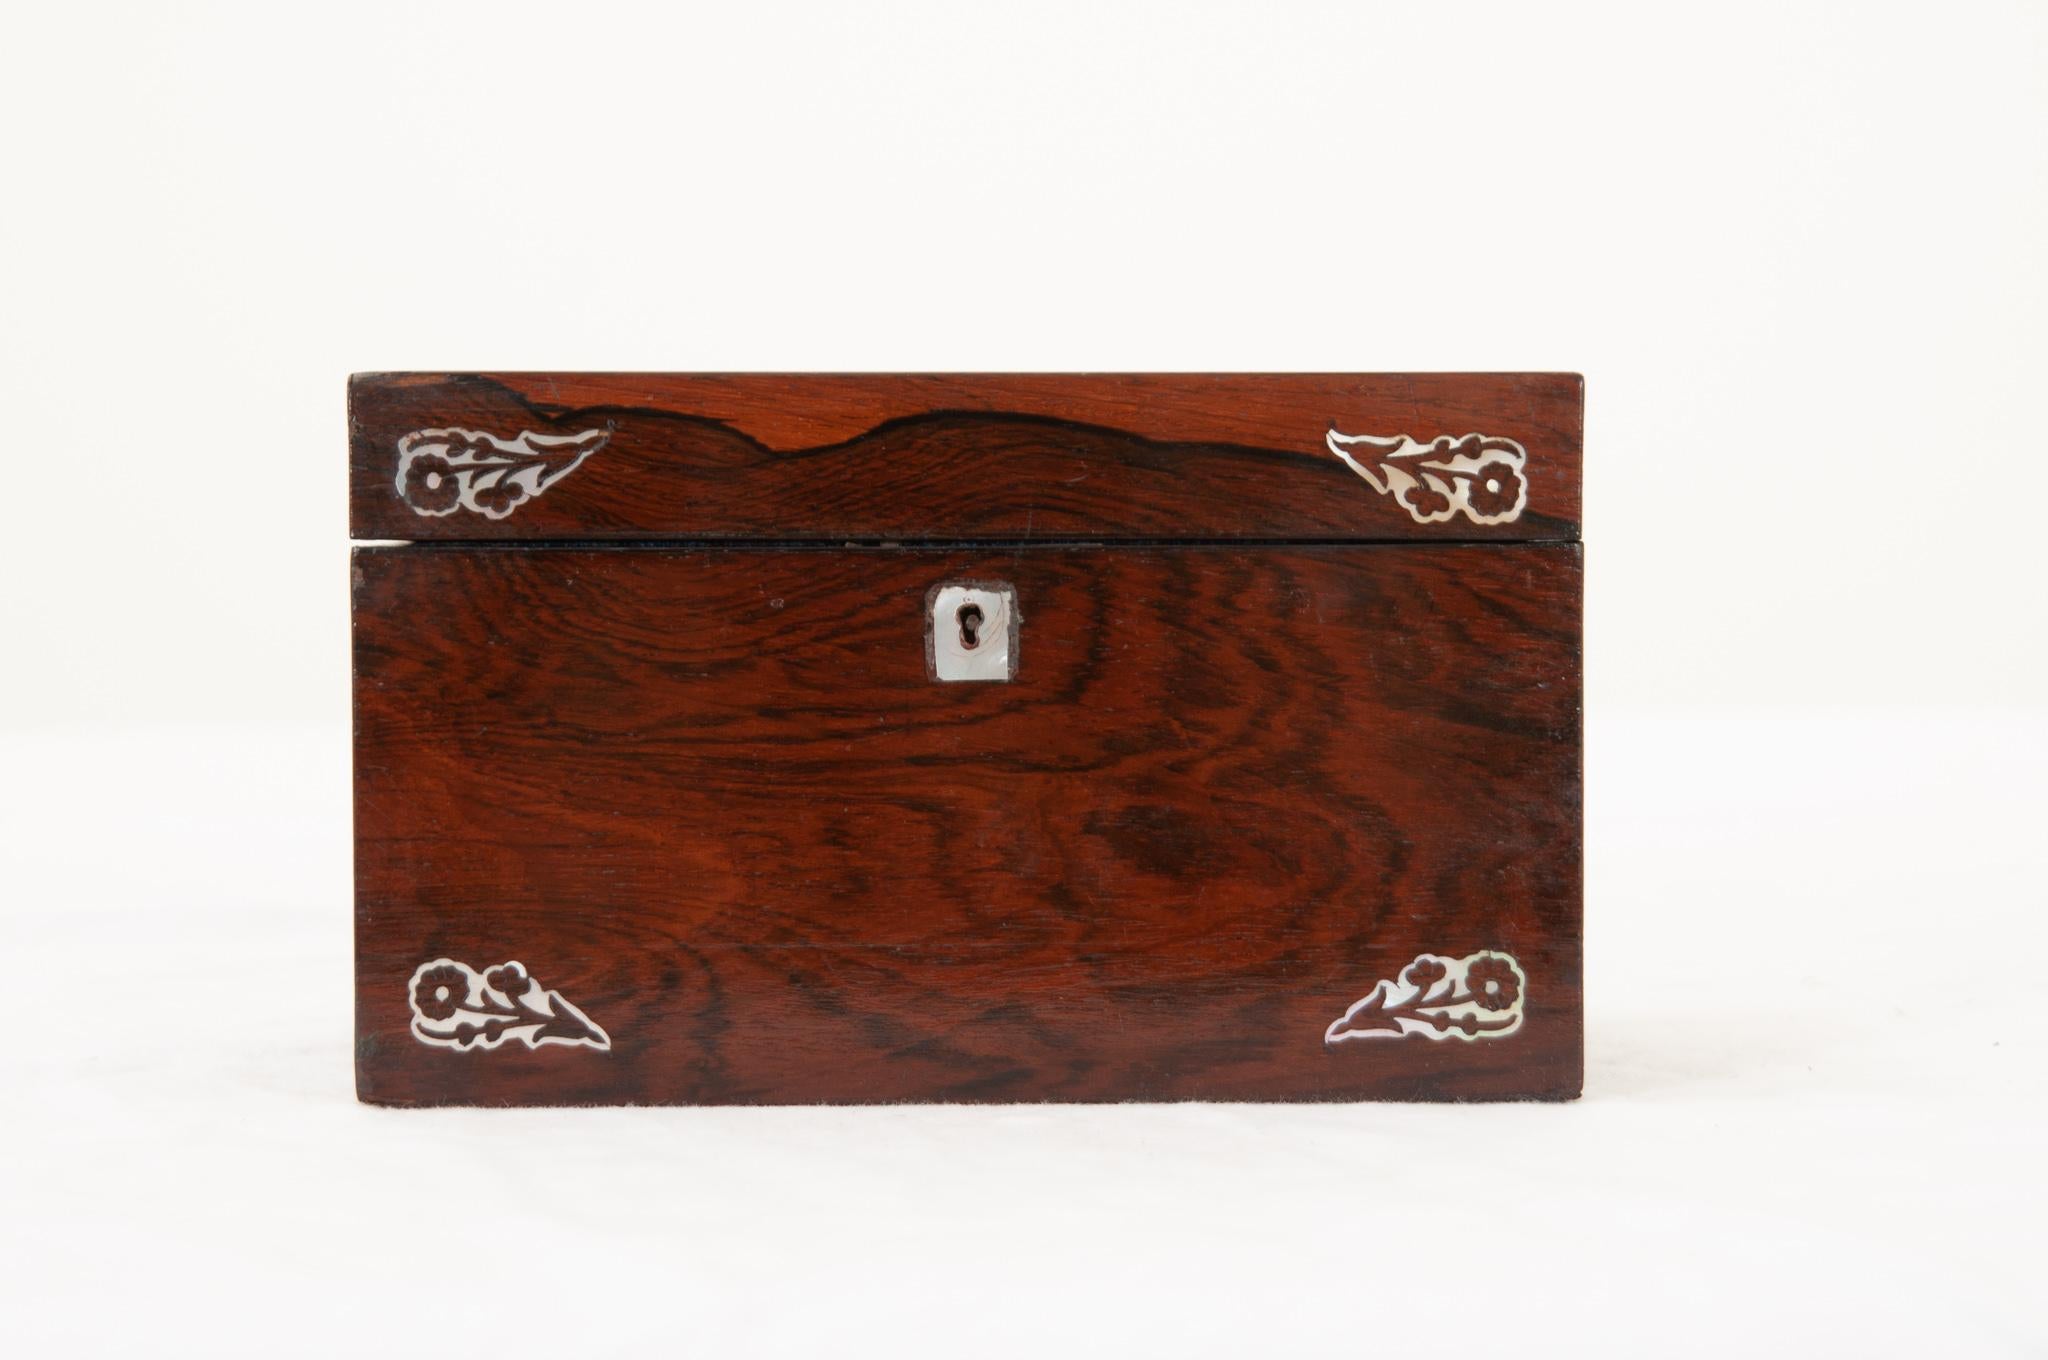 An English 19th century decorative box with lift up lid opening on original brass hinges to reveal a good sized storage compartment lined with the original hand-crafted sapphire blue printed paper. This handsome box features a fantastic red wood